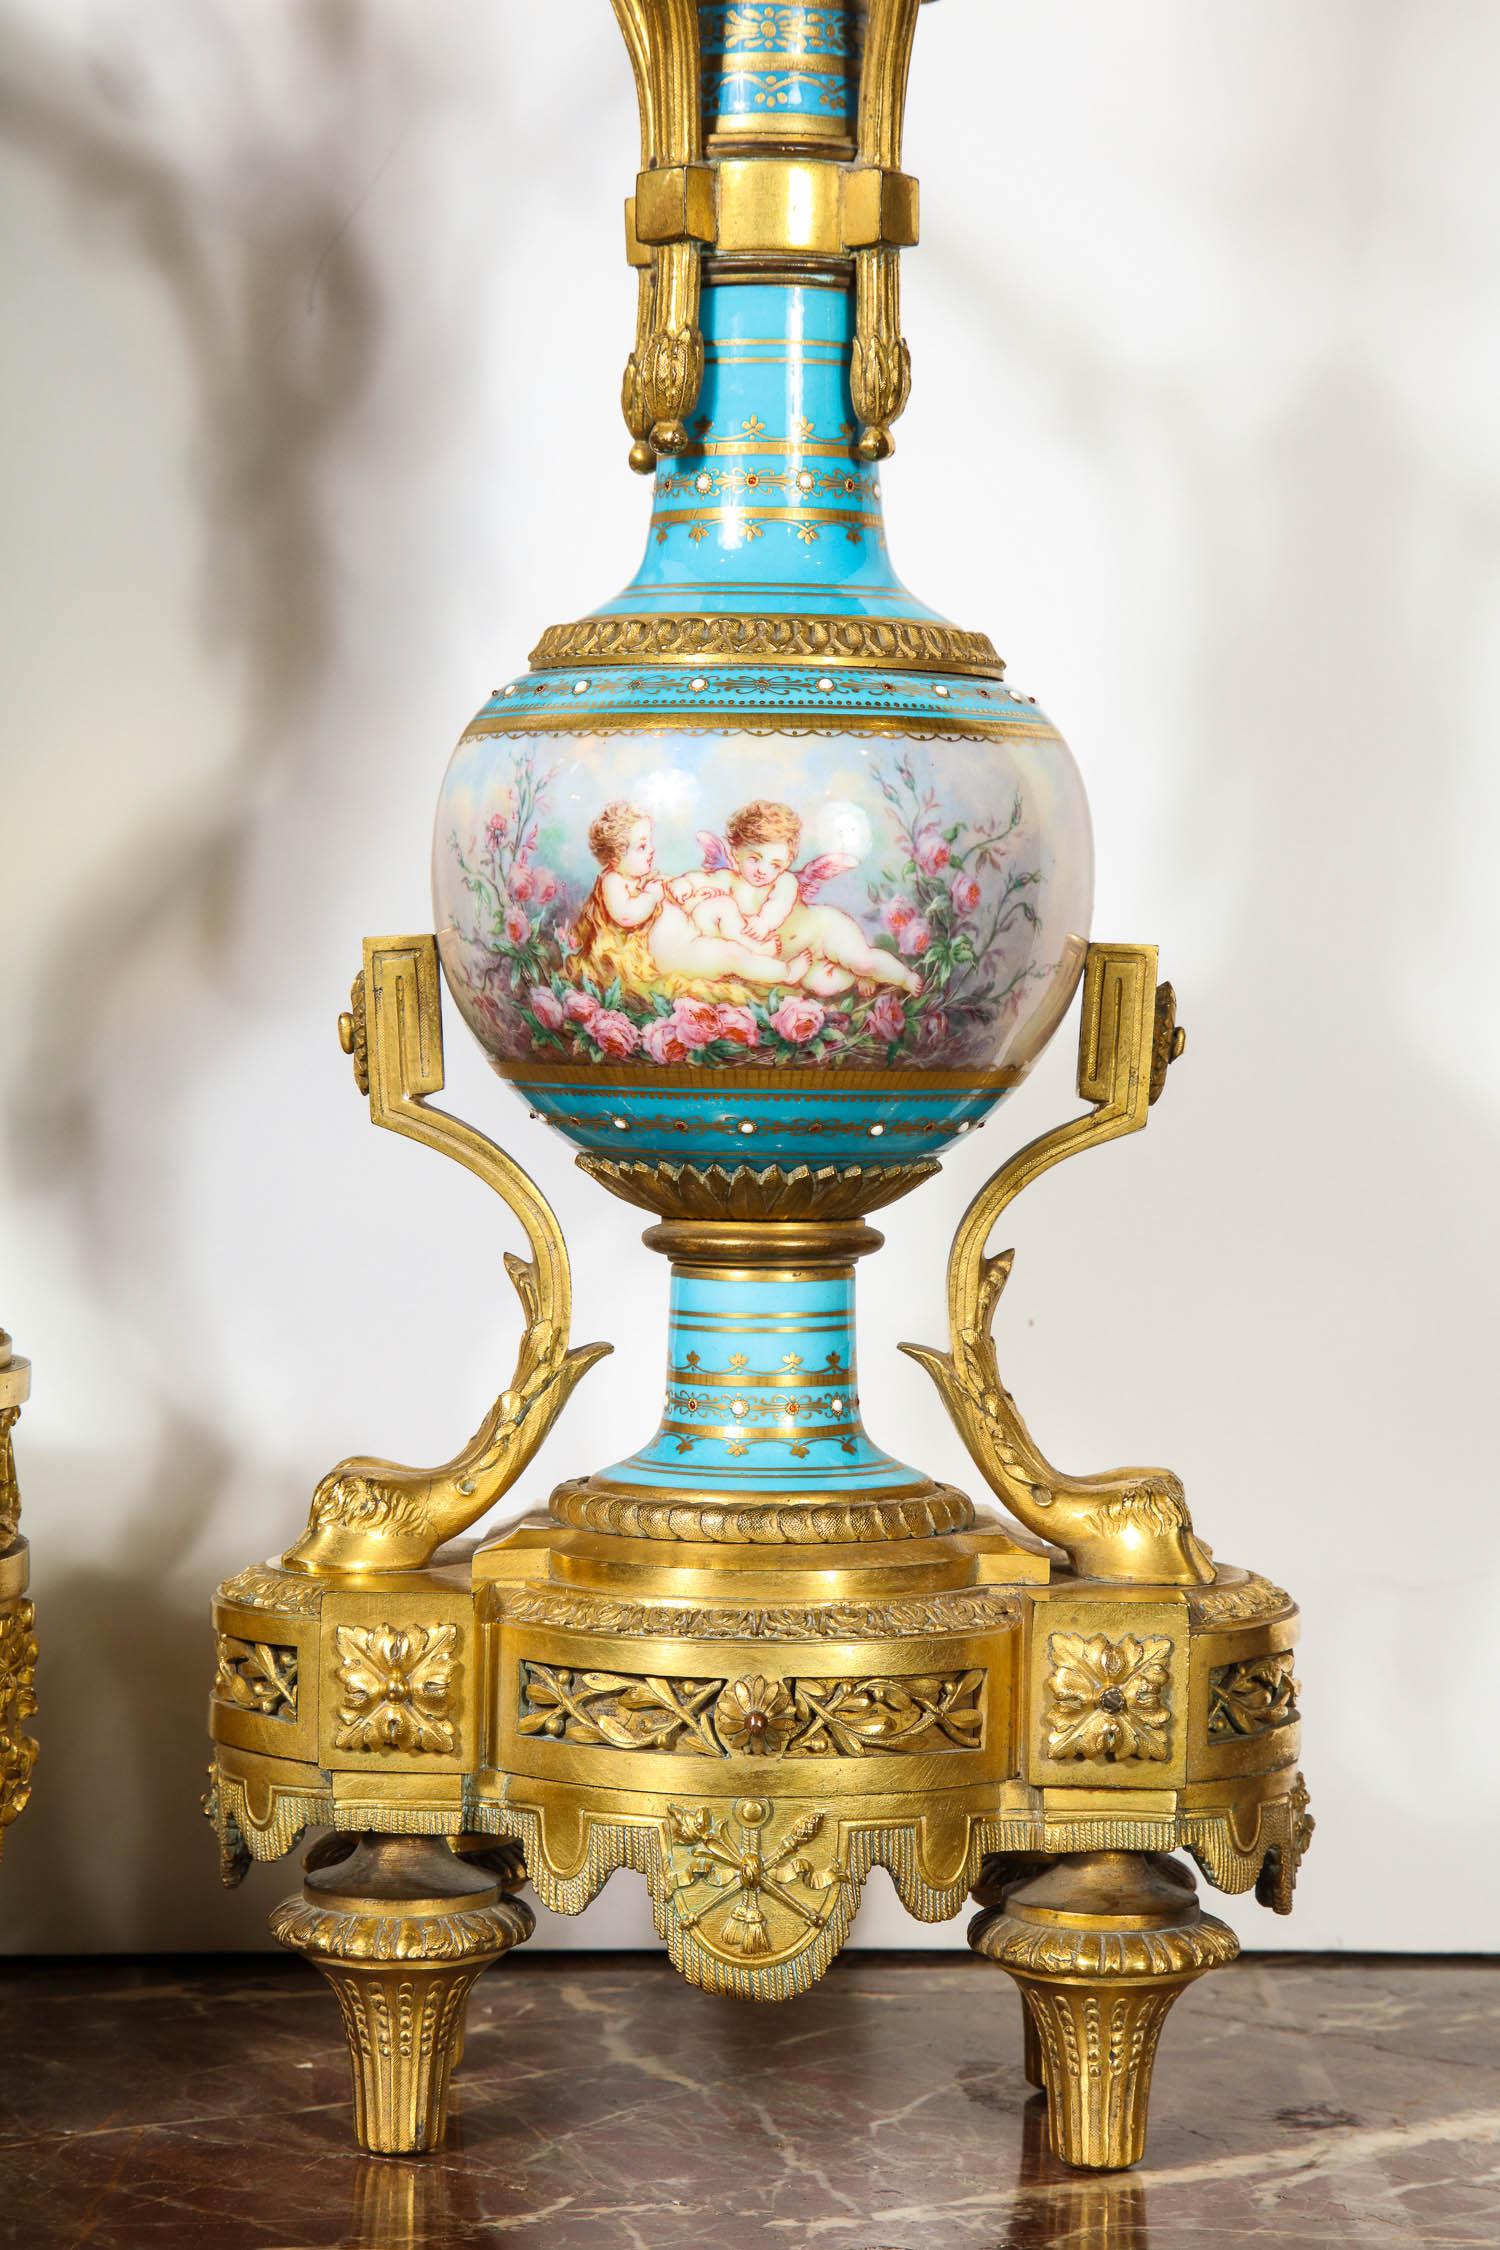 Exceptional French Ormolu-Mounted Turquoise Jeweled Sevres Porcelain Clock Set 3